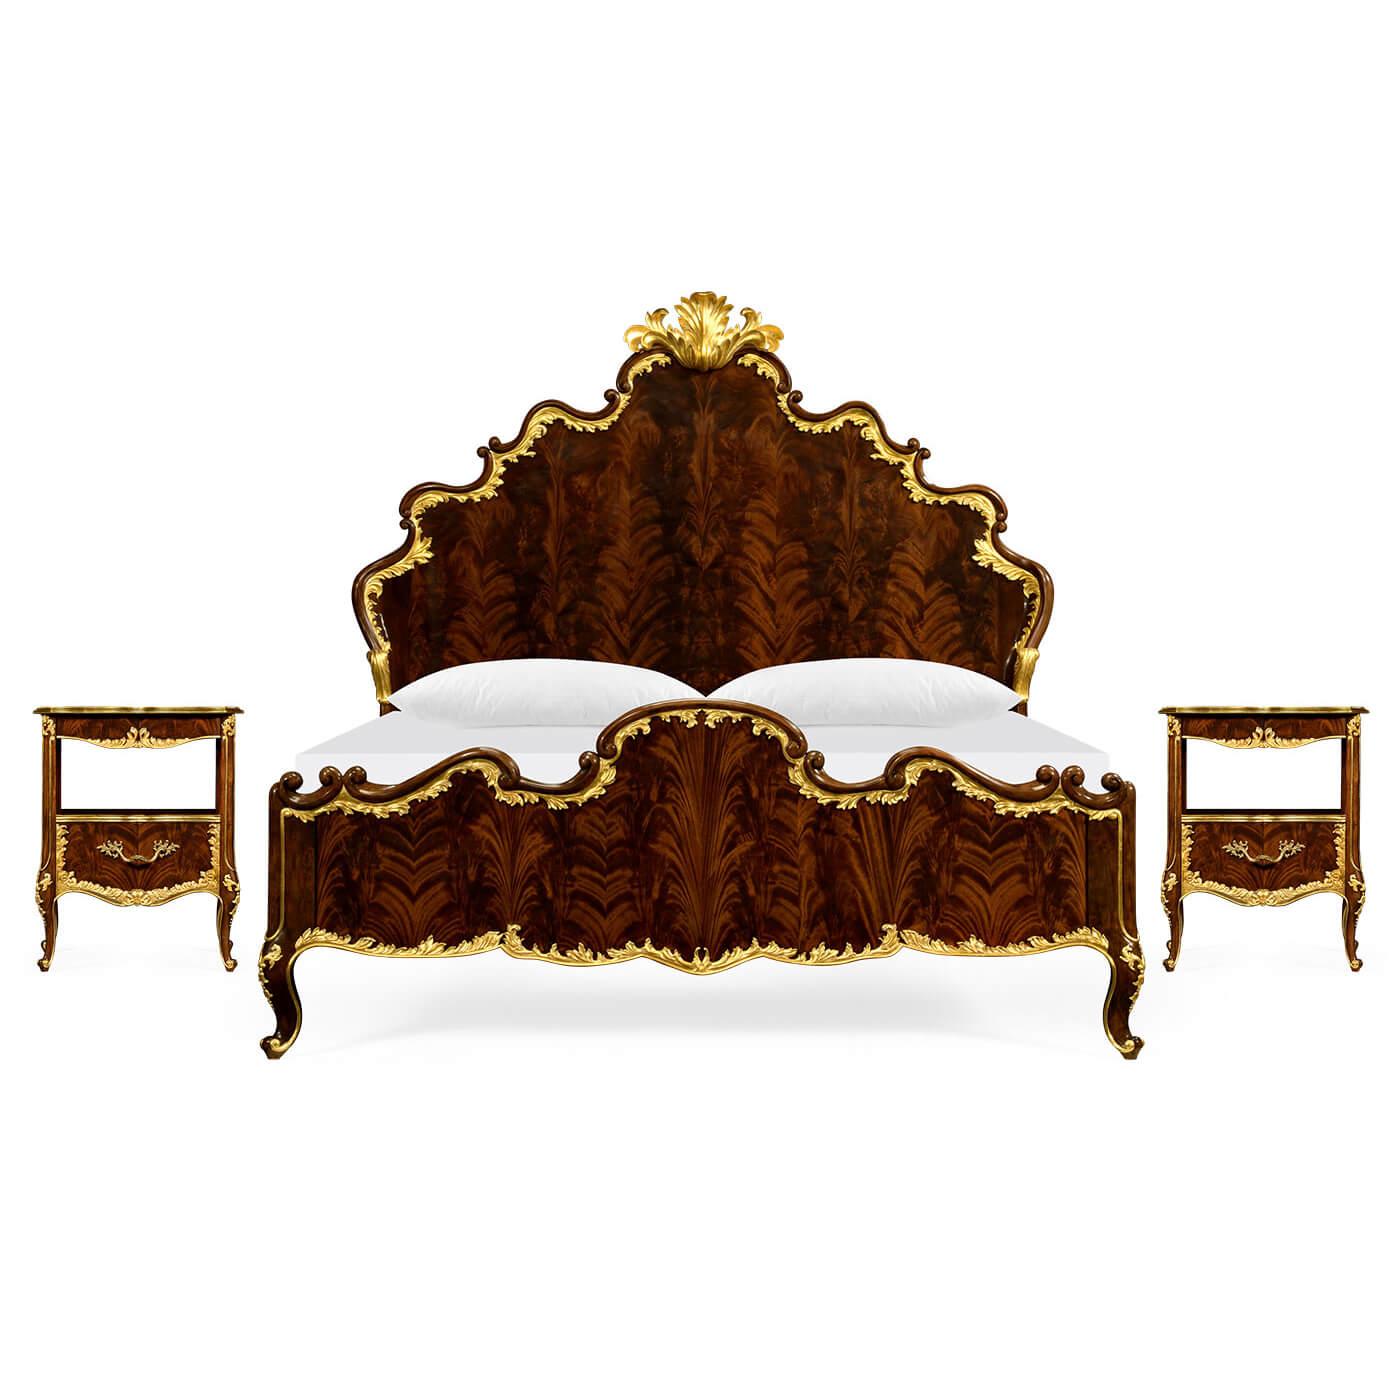 Wood Carved Rococo Mahogany and Gilt Bed For Sale